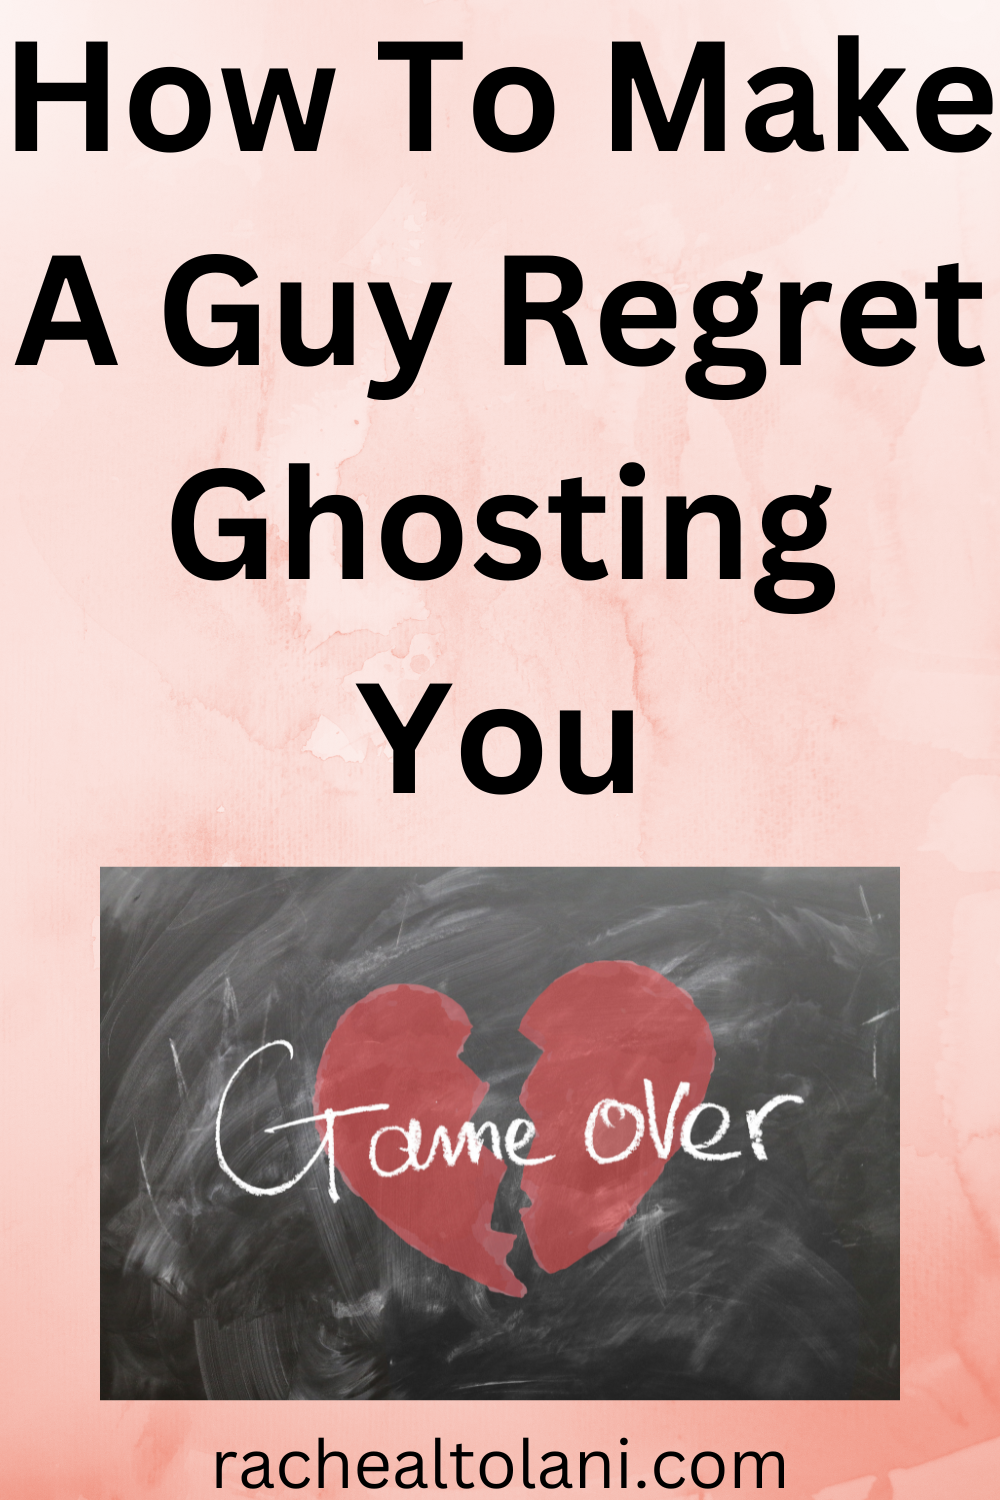 How to make a guy regret ghosting you